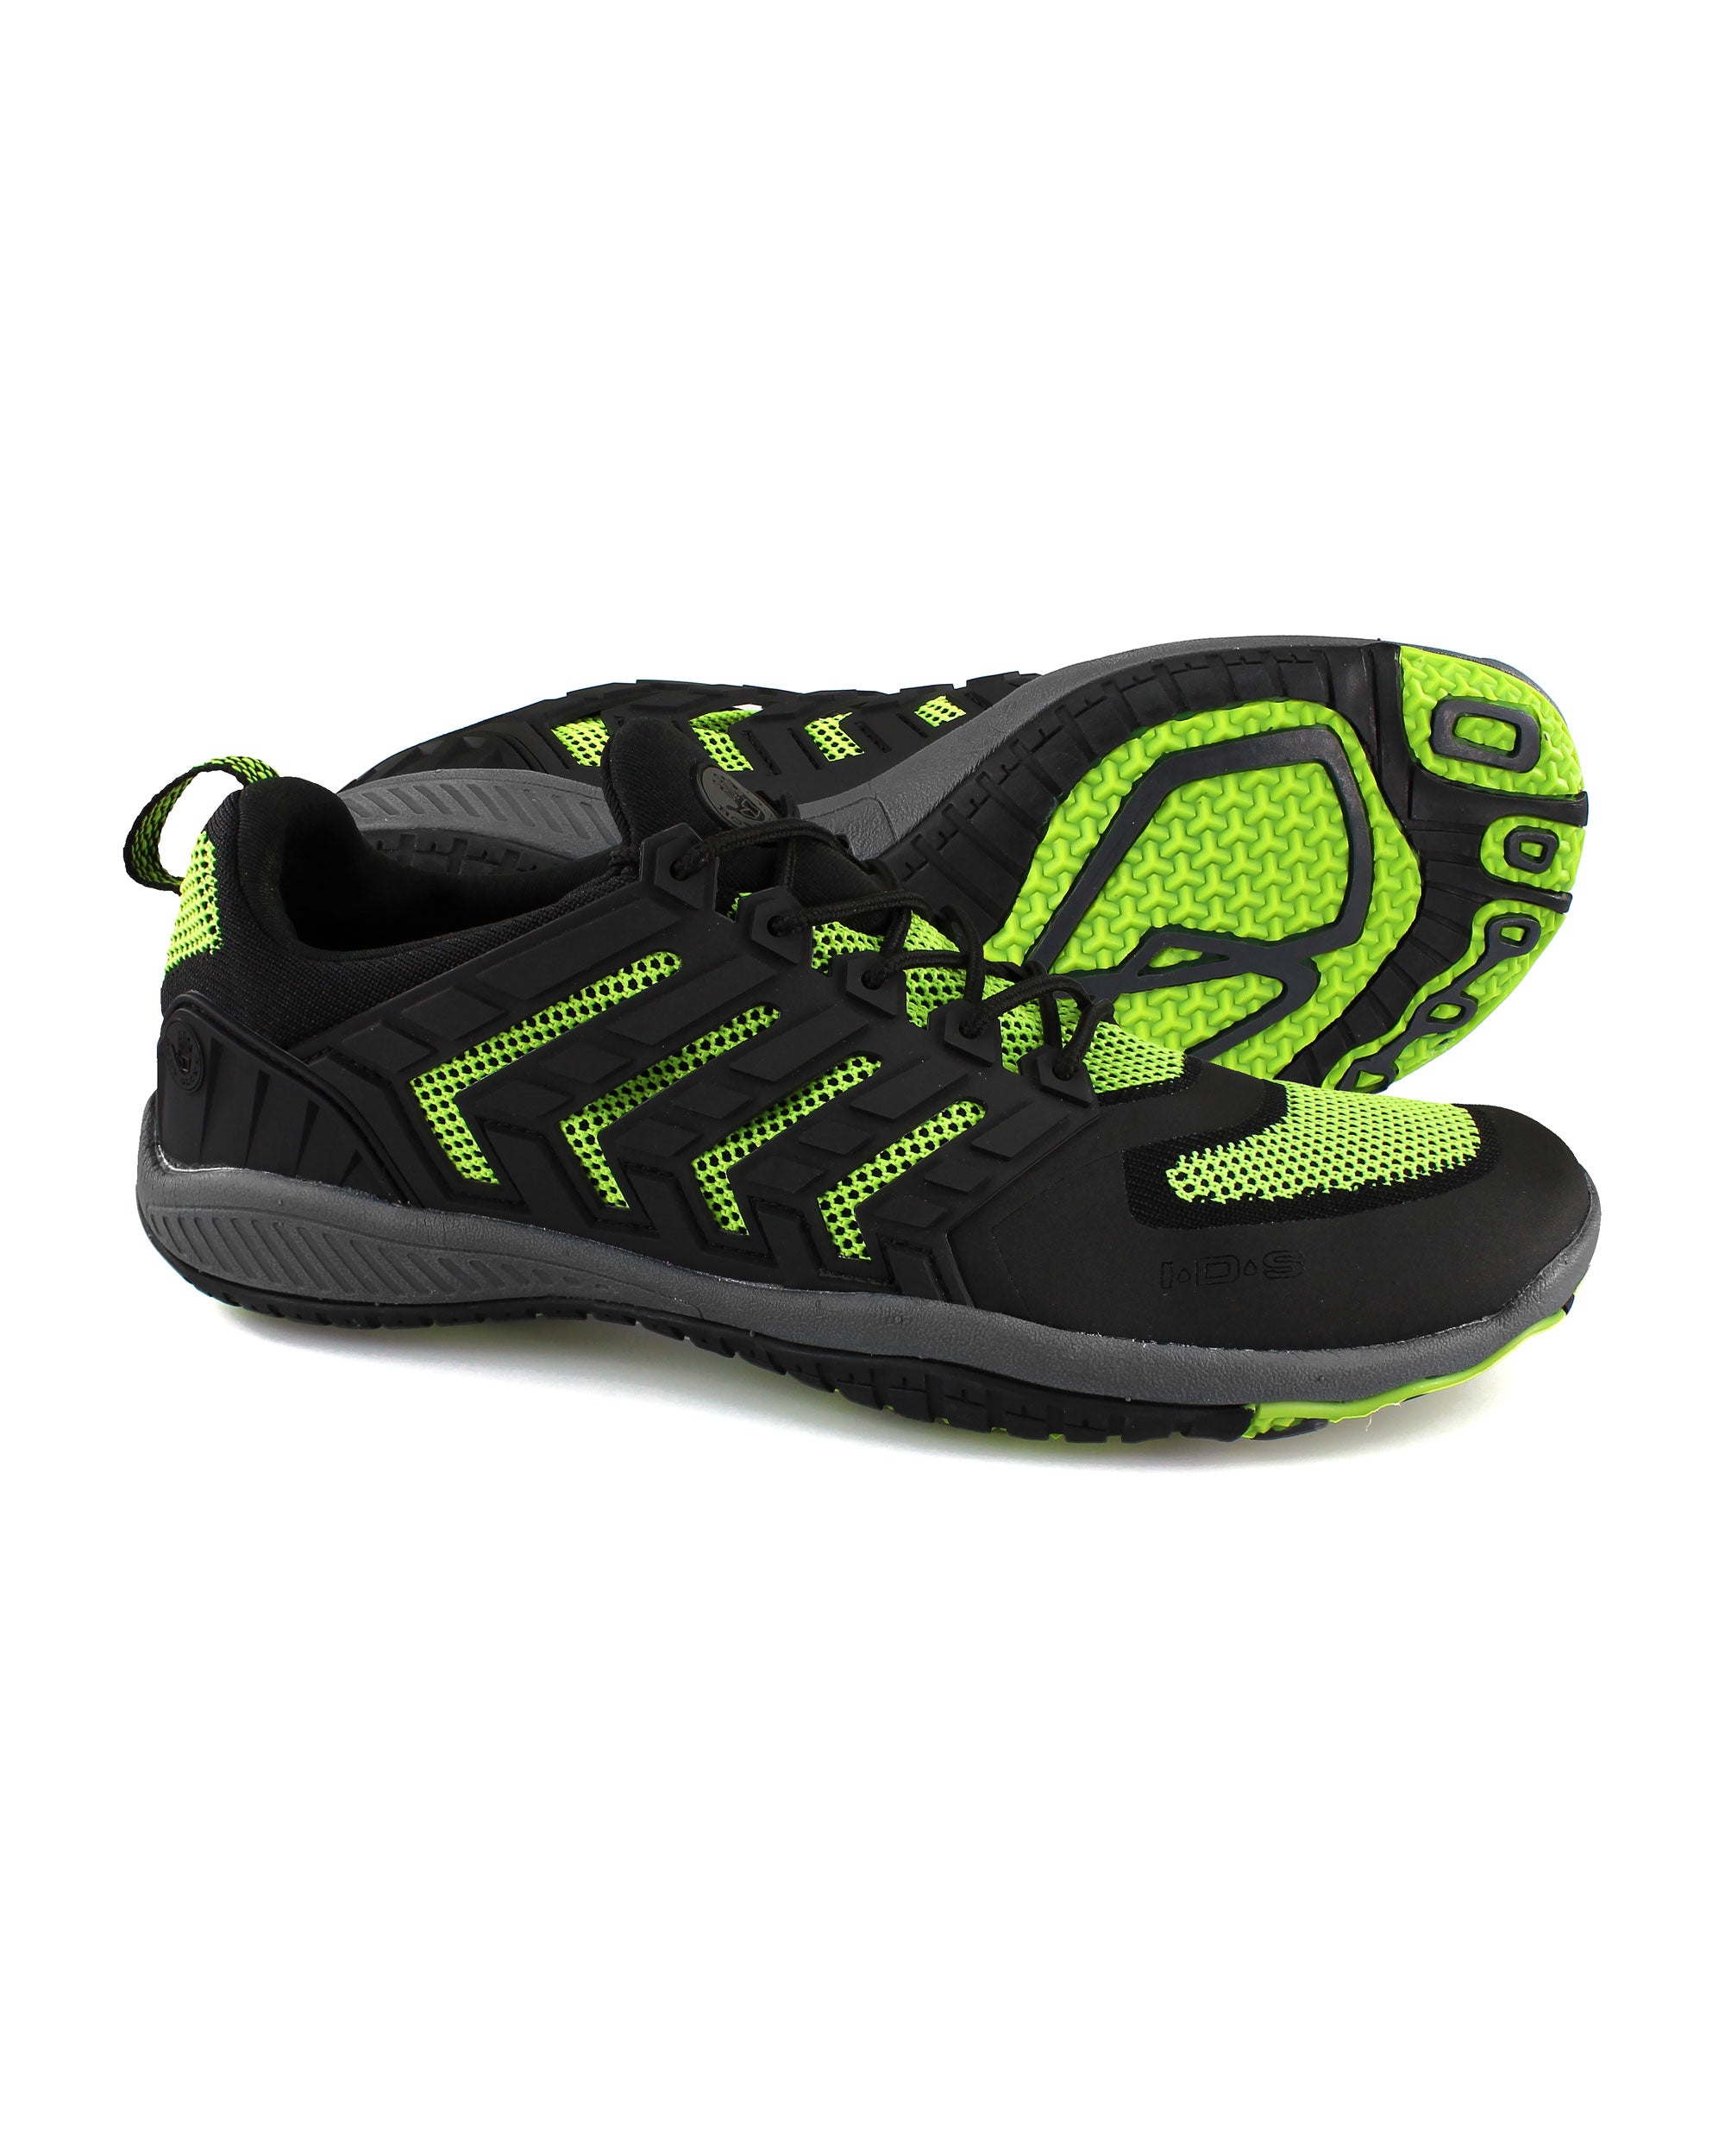 stylish mens water shoes